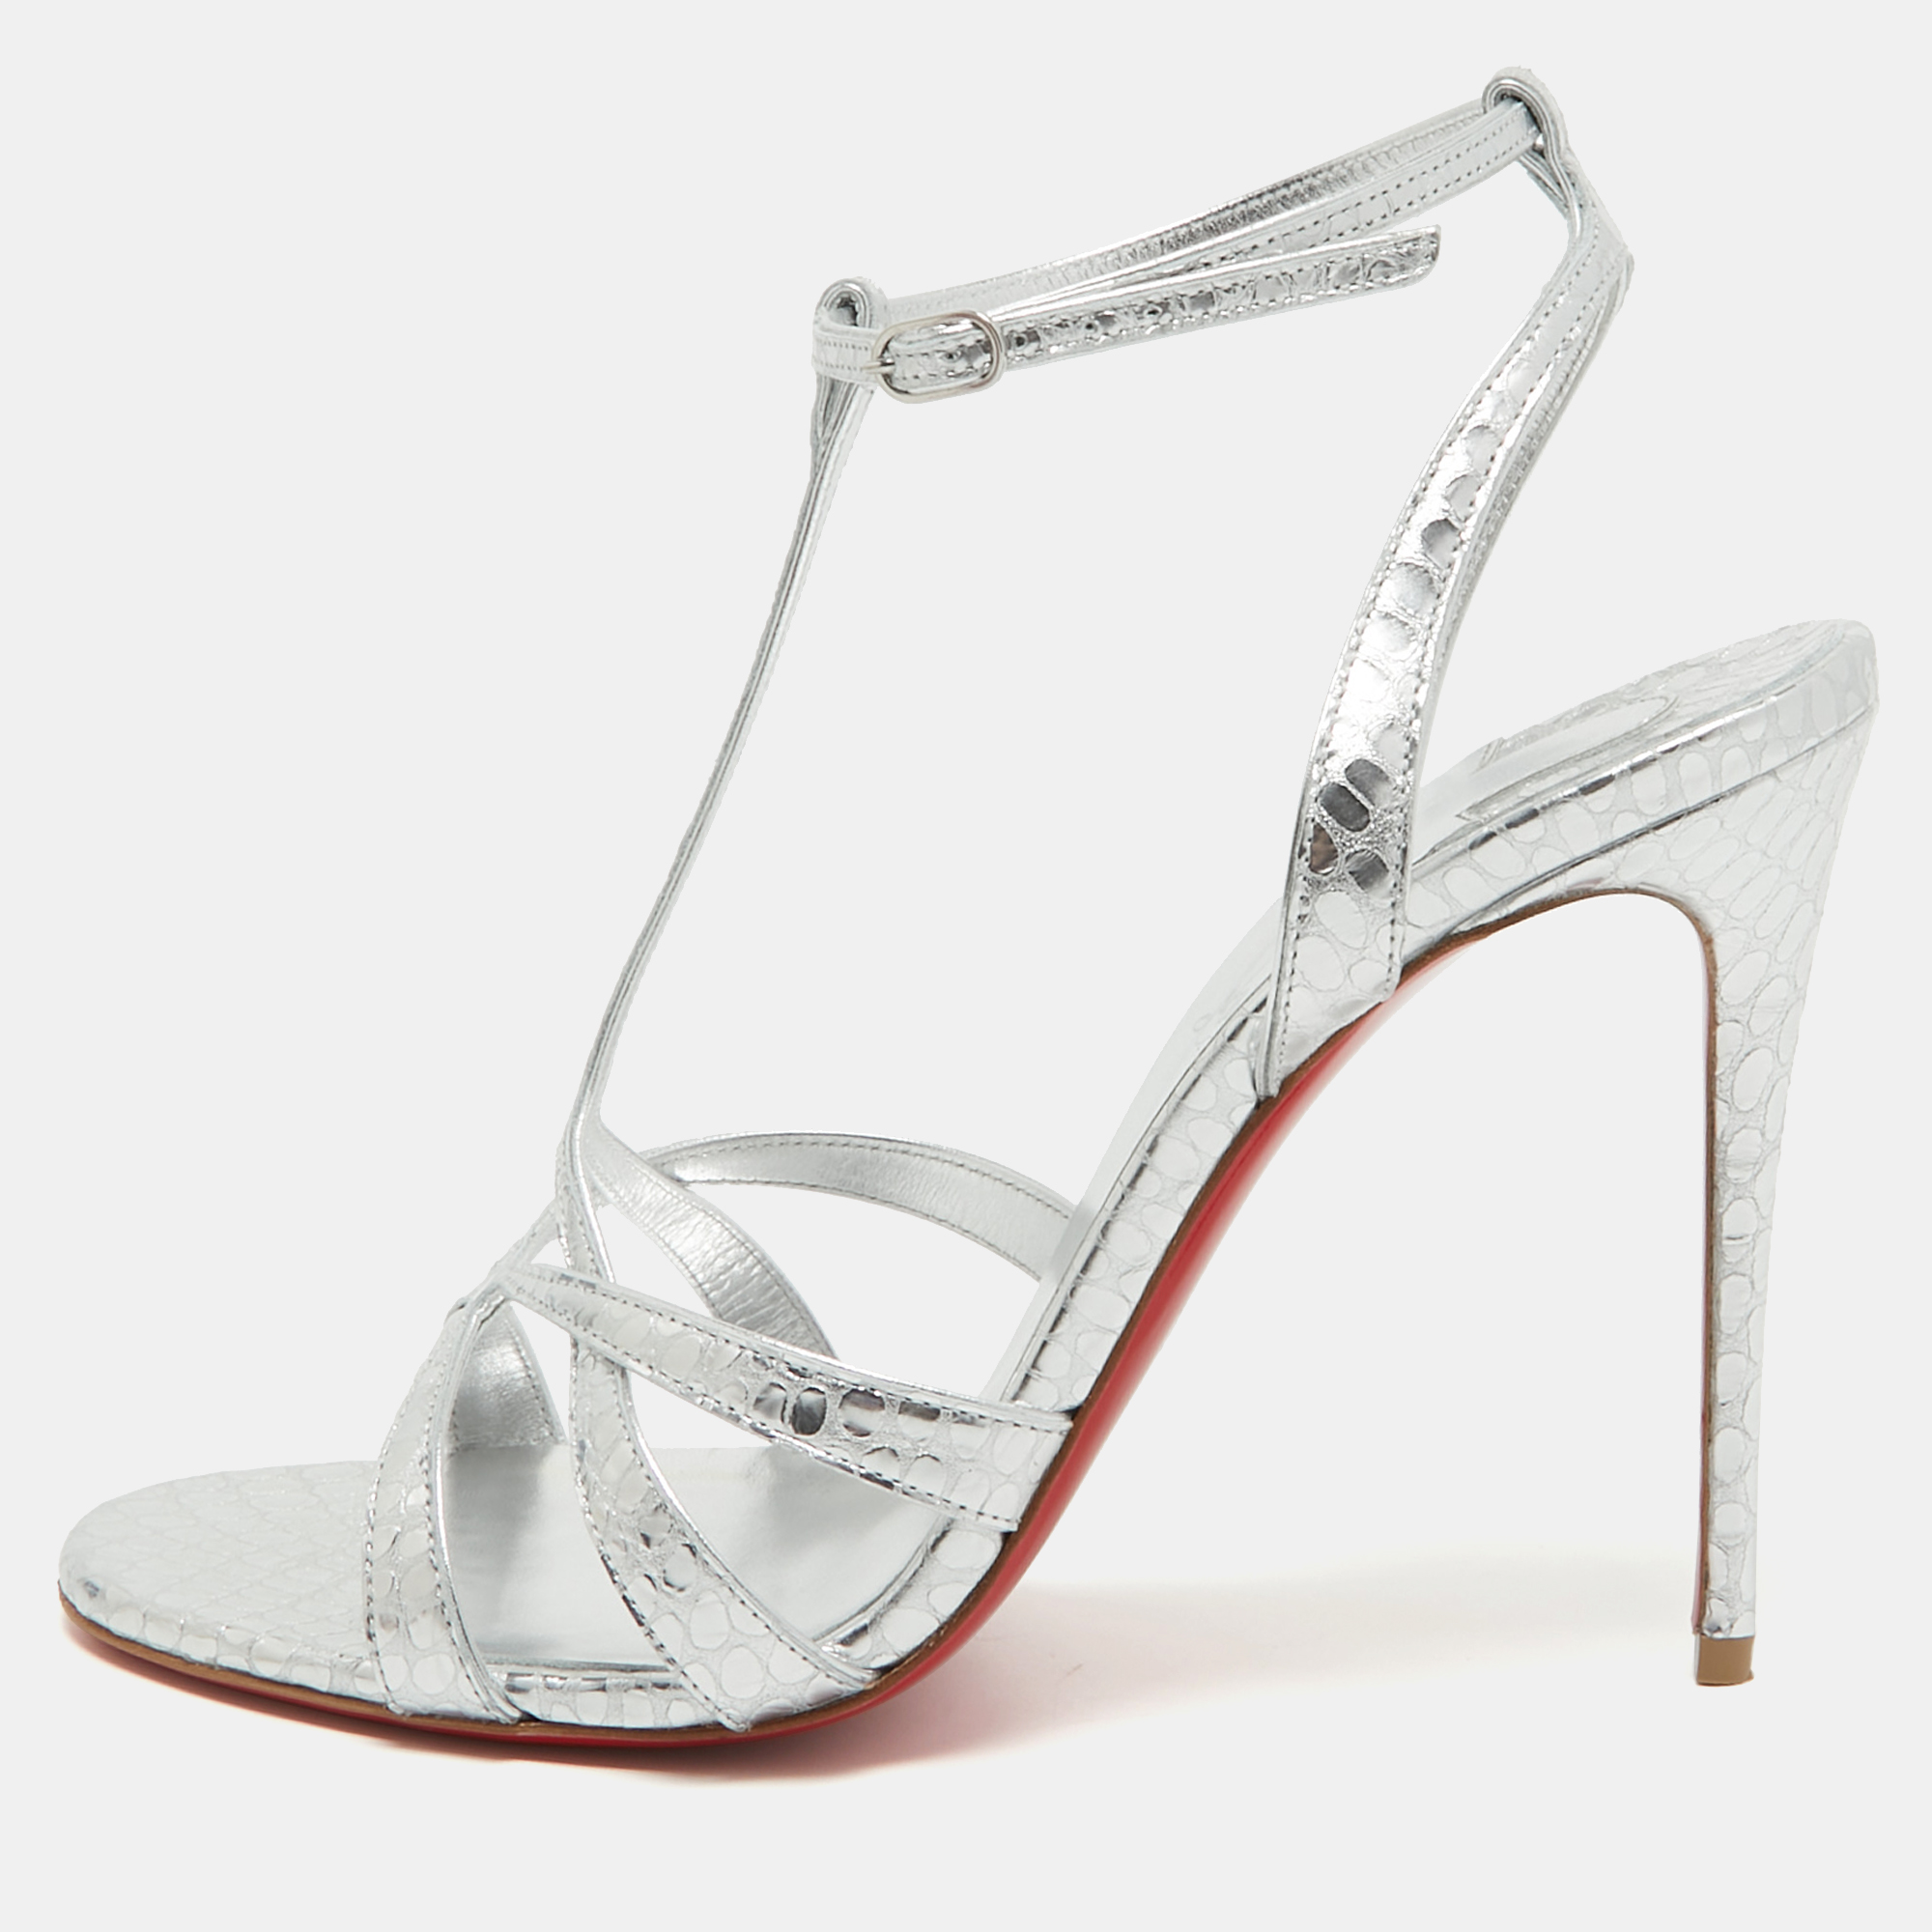 Pre-owned Christian Louboutin Silver Textured Leather Tangueva Sandals Size 39